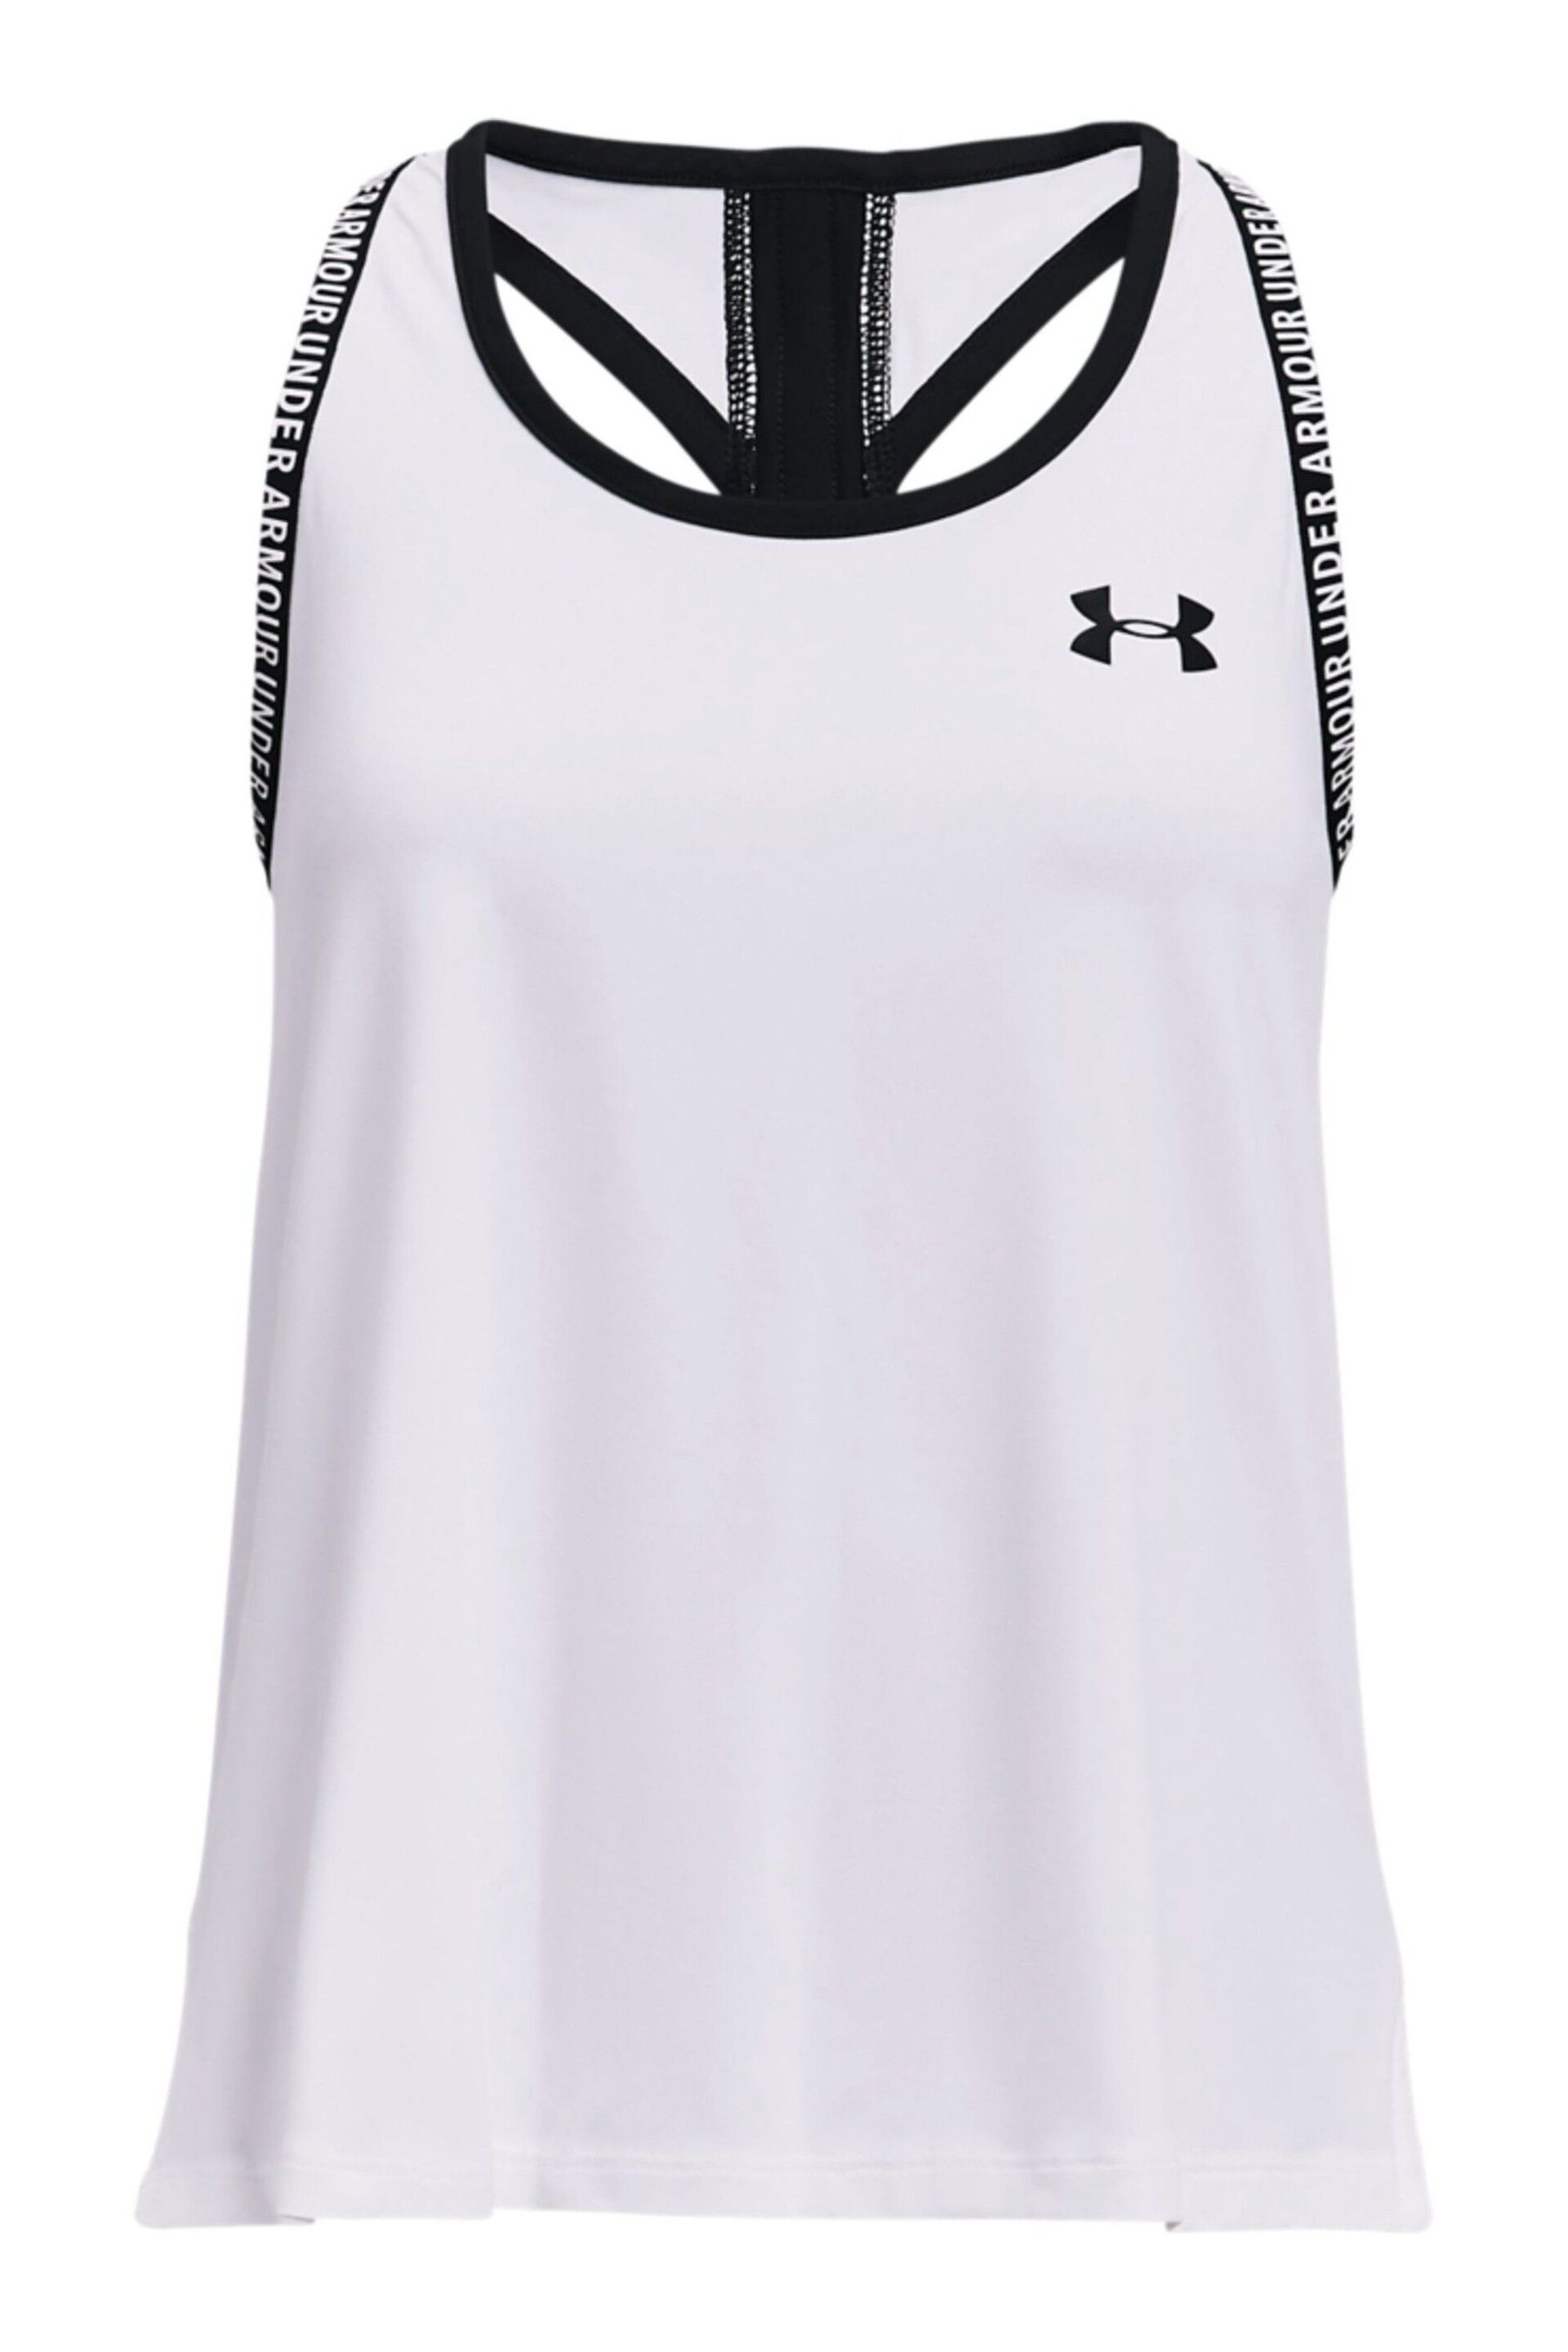 Under Armour White/Black Knockout Tank - Image 1 of 2